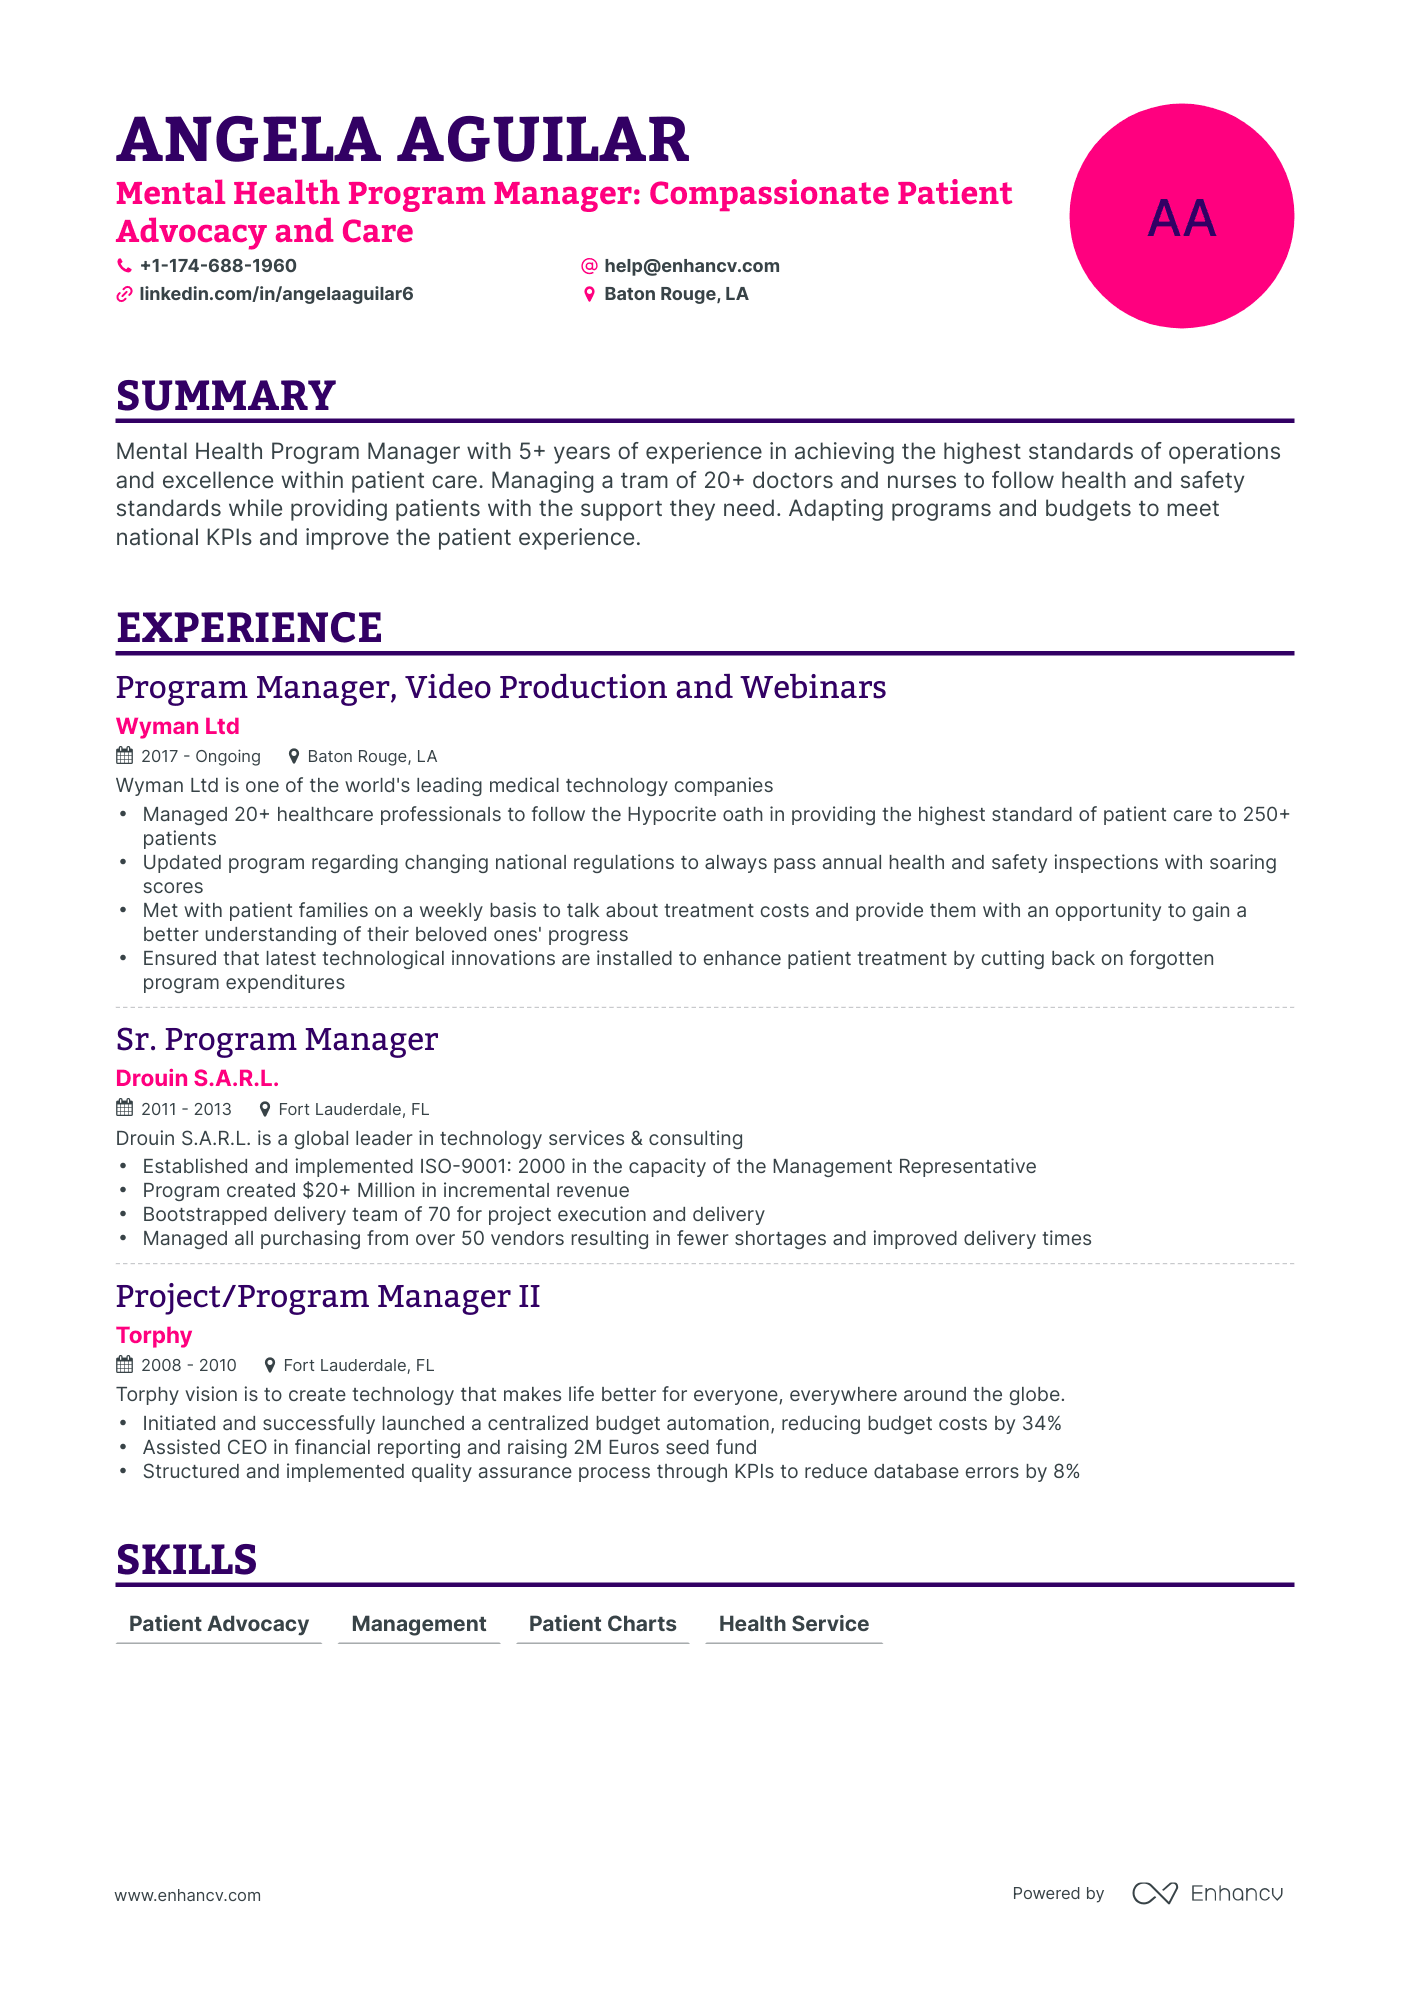 Classic Mental Health Program Manager Resume Template